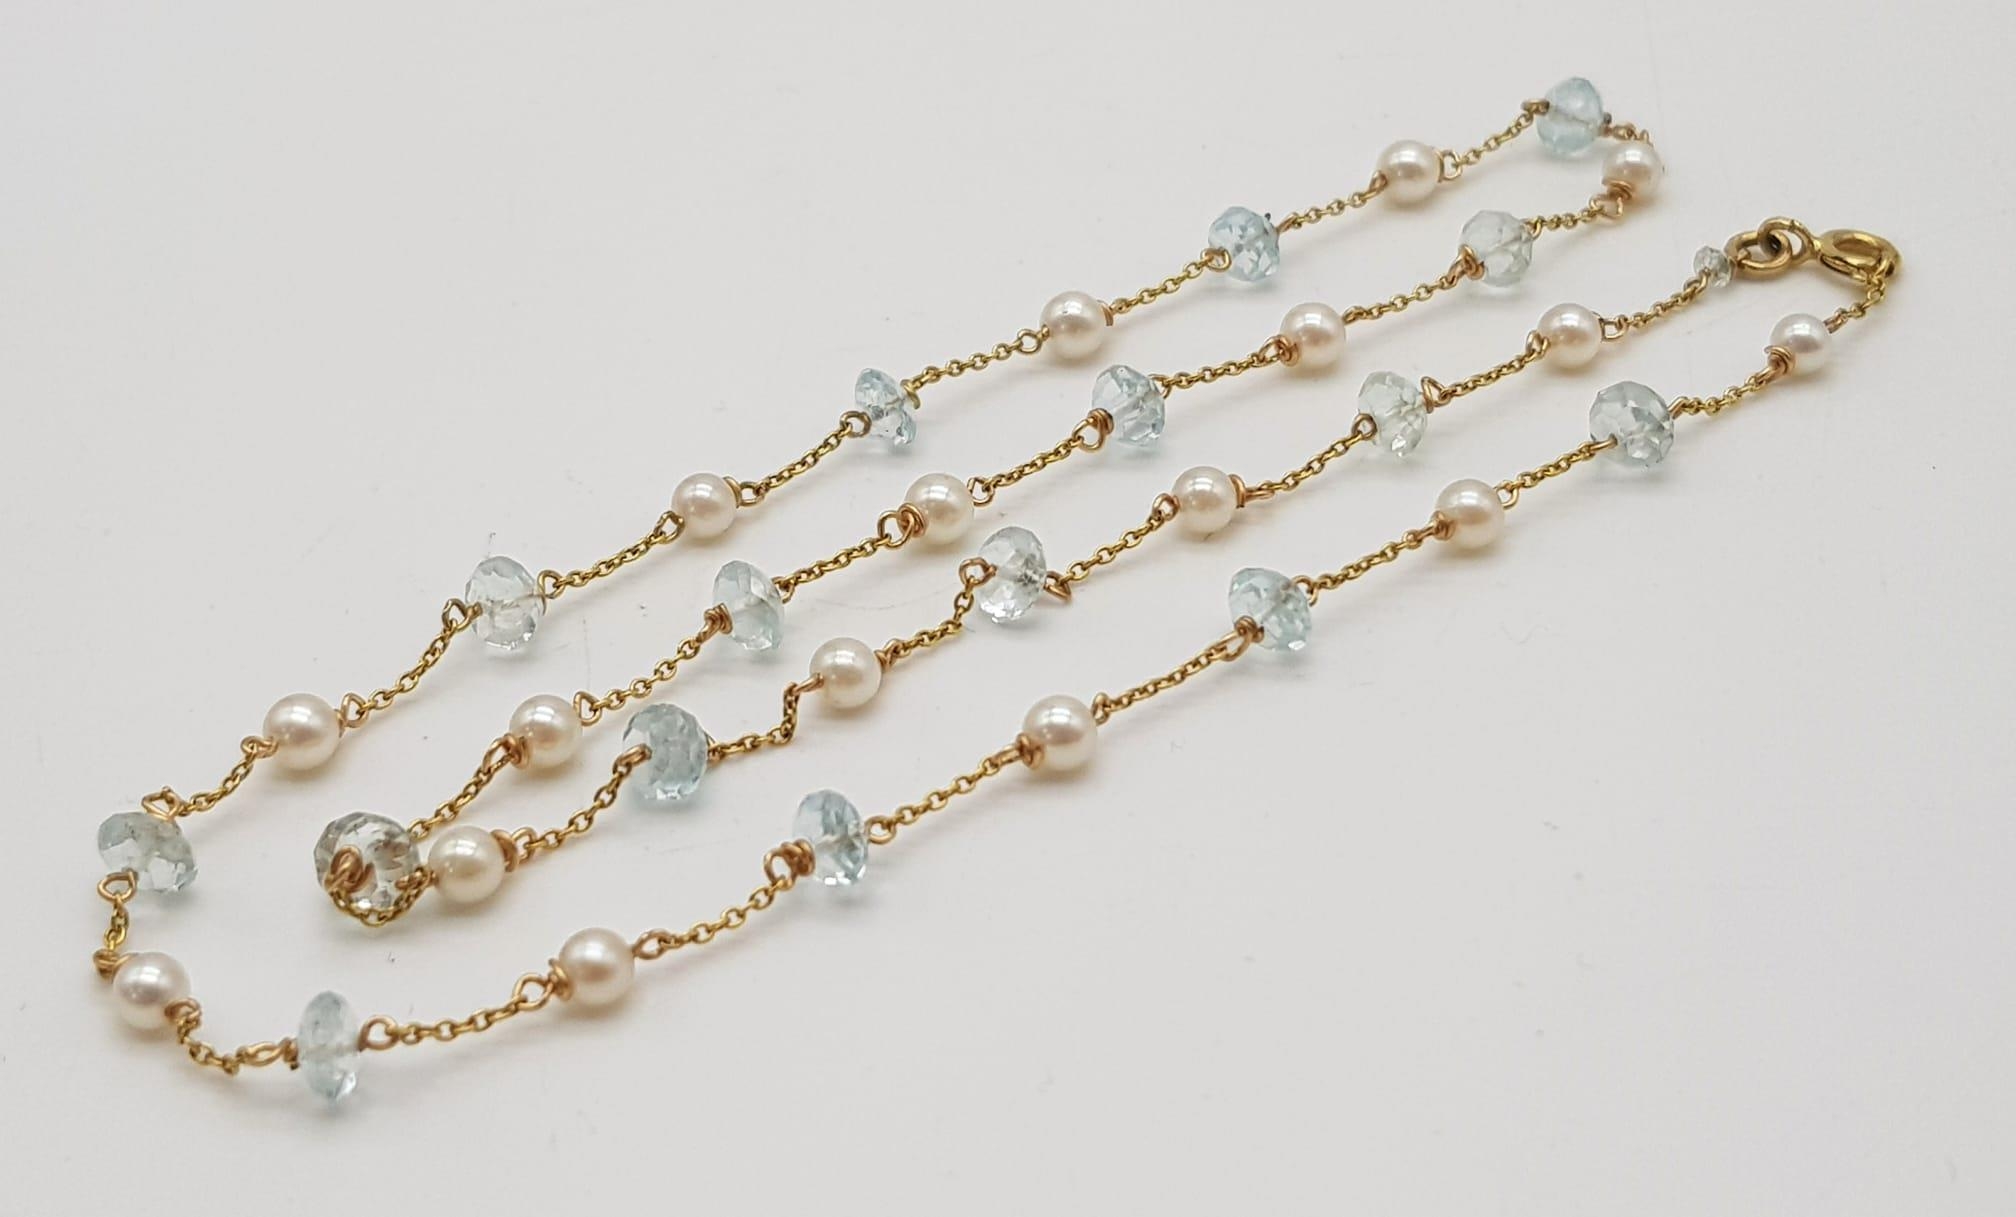 A Vintage Seed Pearl and White Quartz 14K Yellow Gold Necklace. 4.5g total weight. 44cm. - Image 3 of 4